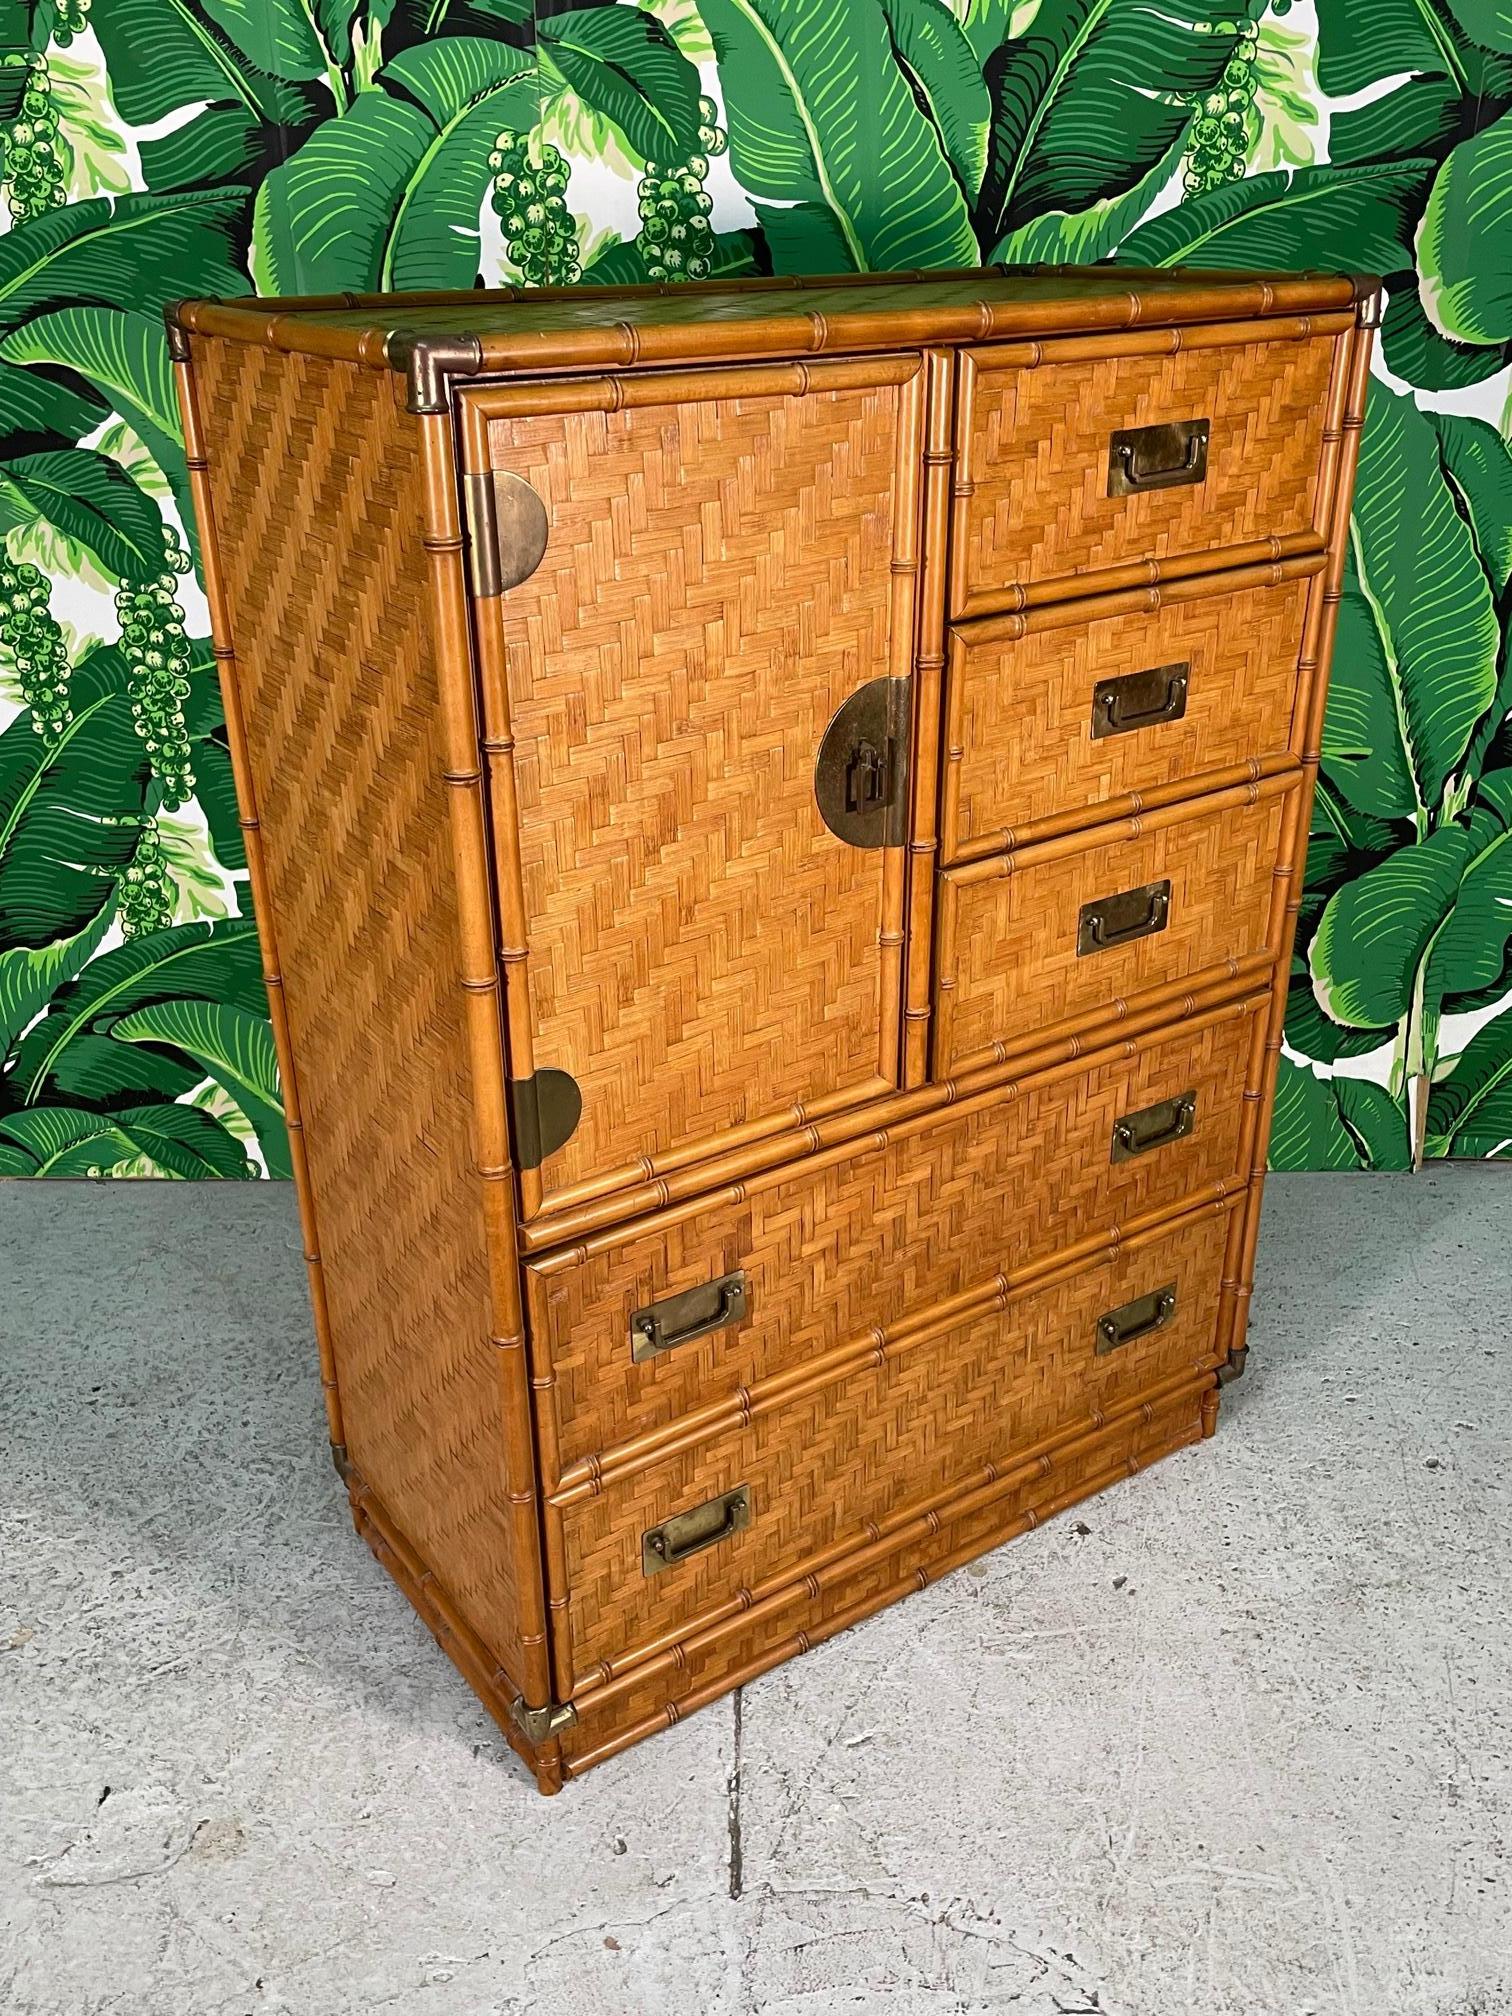 Vintage gentleman's dresser features faux bamboo detailing and a complete veneer of woven rattan basket weave in a herringbone pattern. Brass hardware and corner accents. The unique rattan veneer gives a look of parquet. Warm, rich tone throughout.